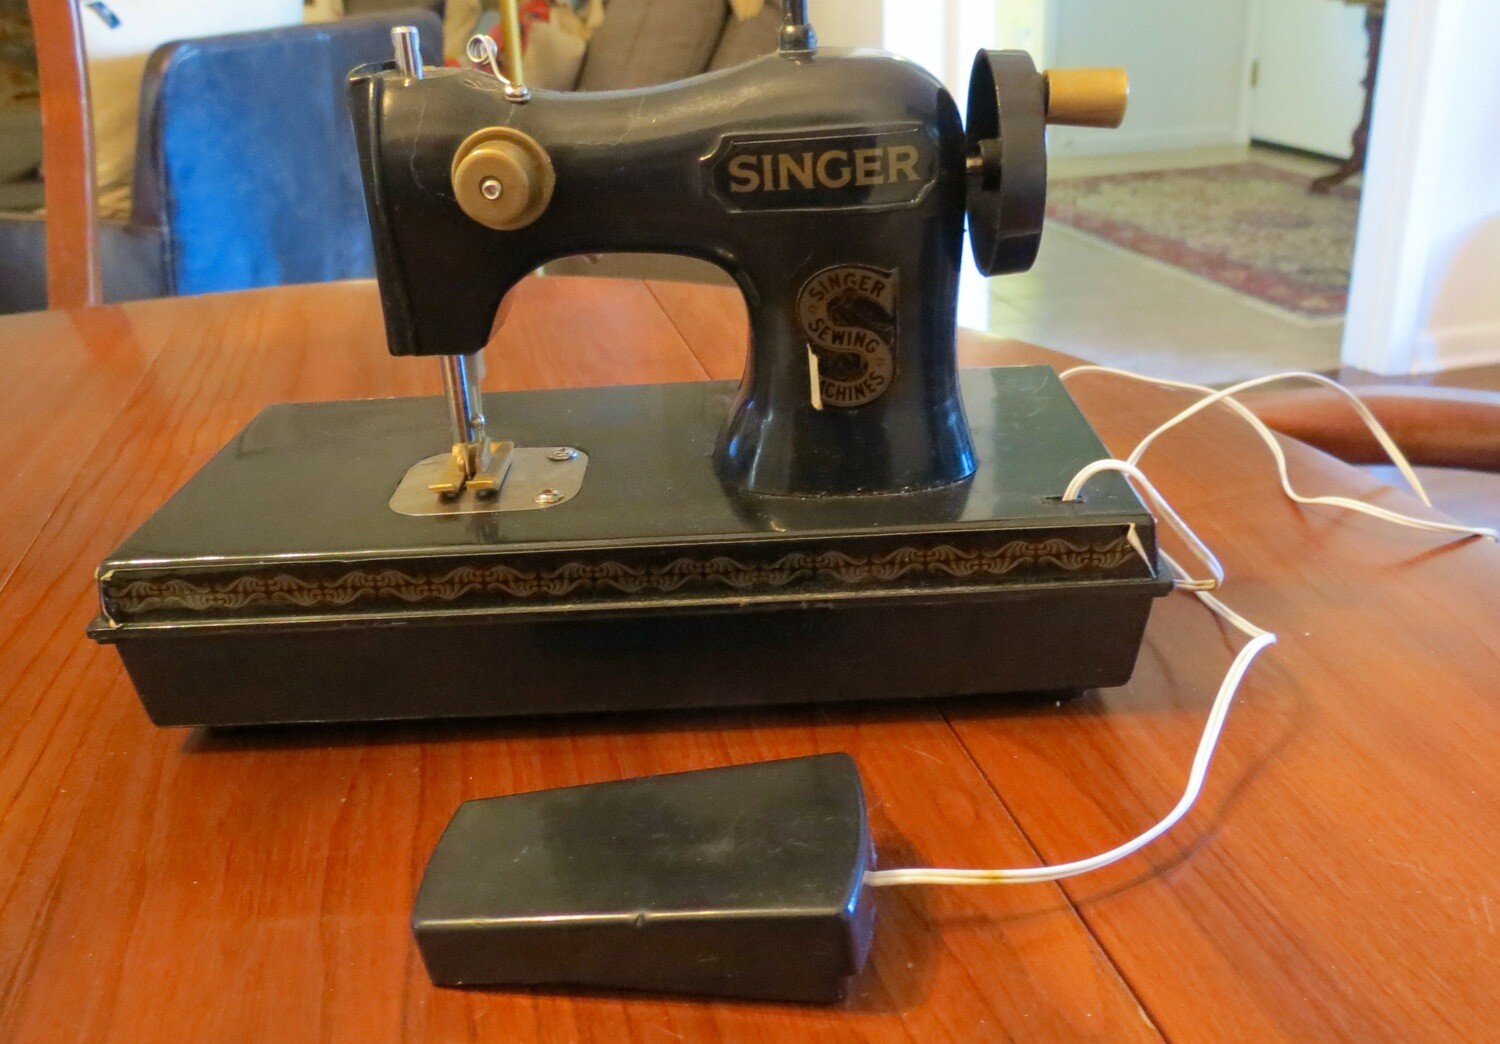 Vintage Singer Sewing Machine
Toy Black Plastic Battery Operated